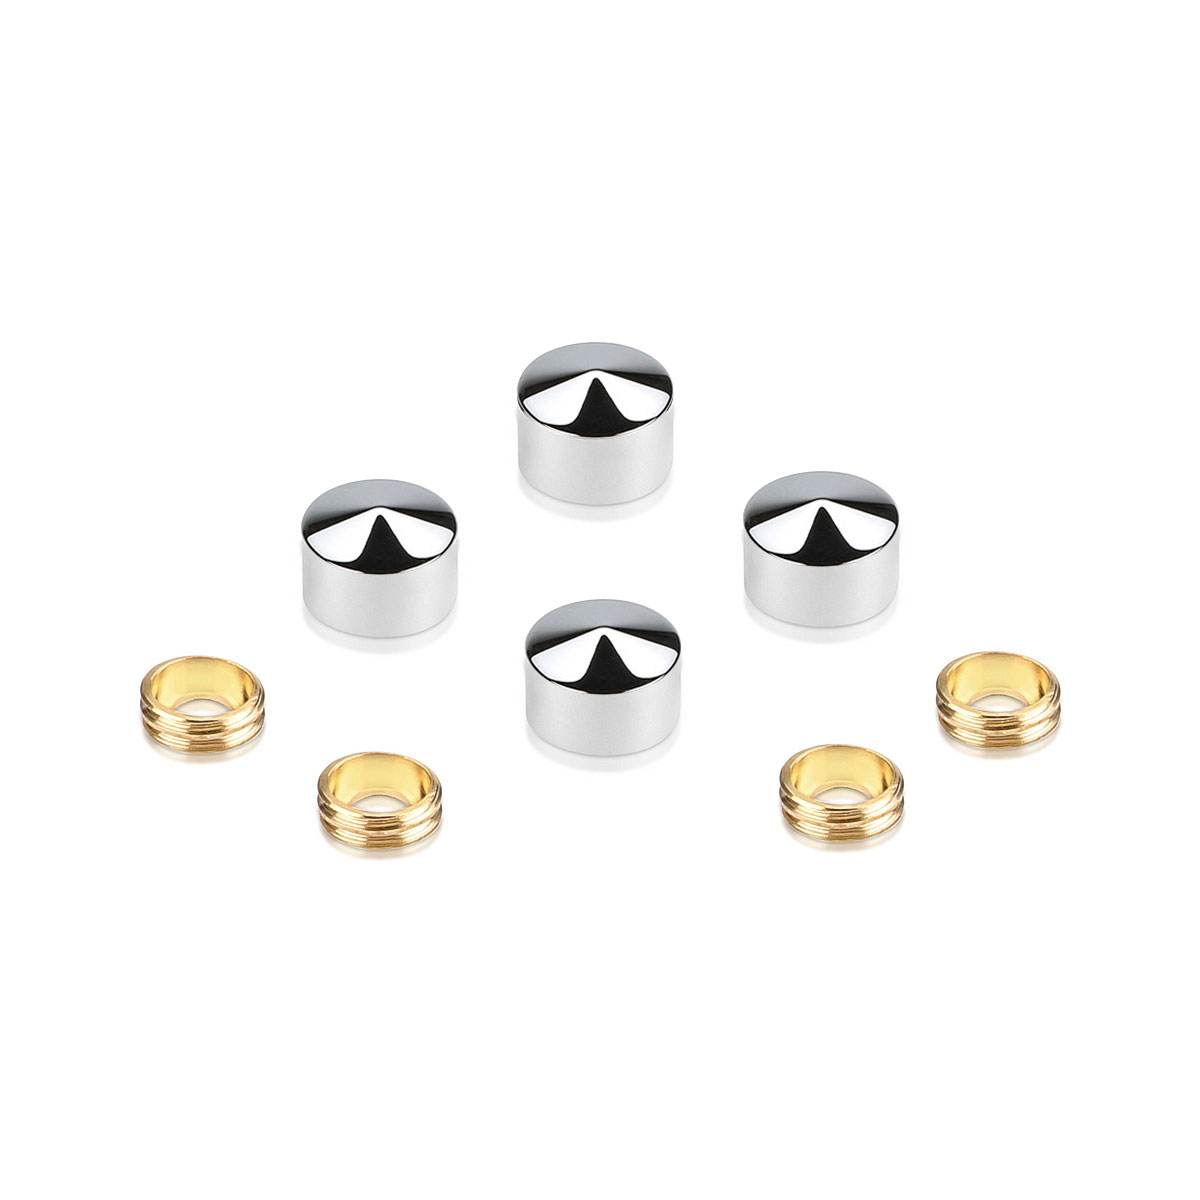 Set of Conical Screw Cover Diameter 1/2'', Polished Stainless Steel Finish (Indoor Use Only)